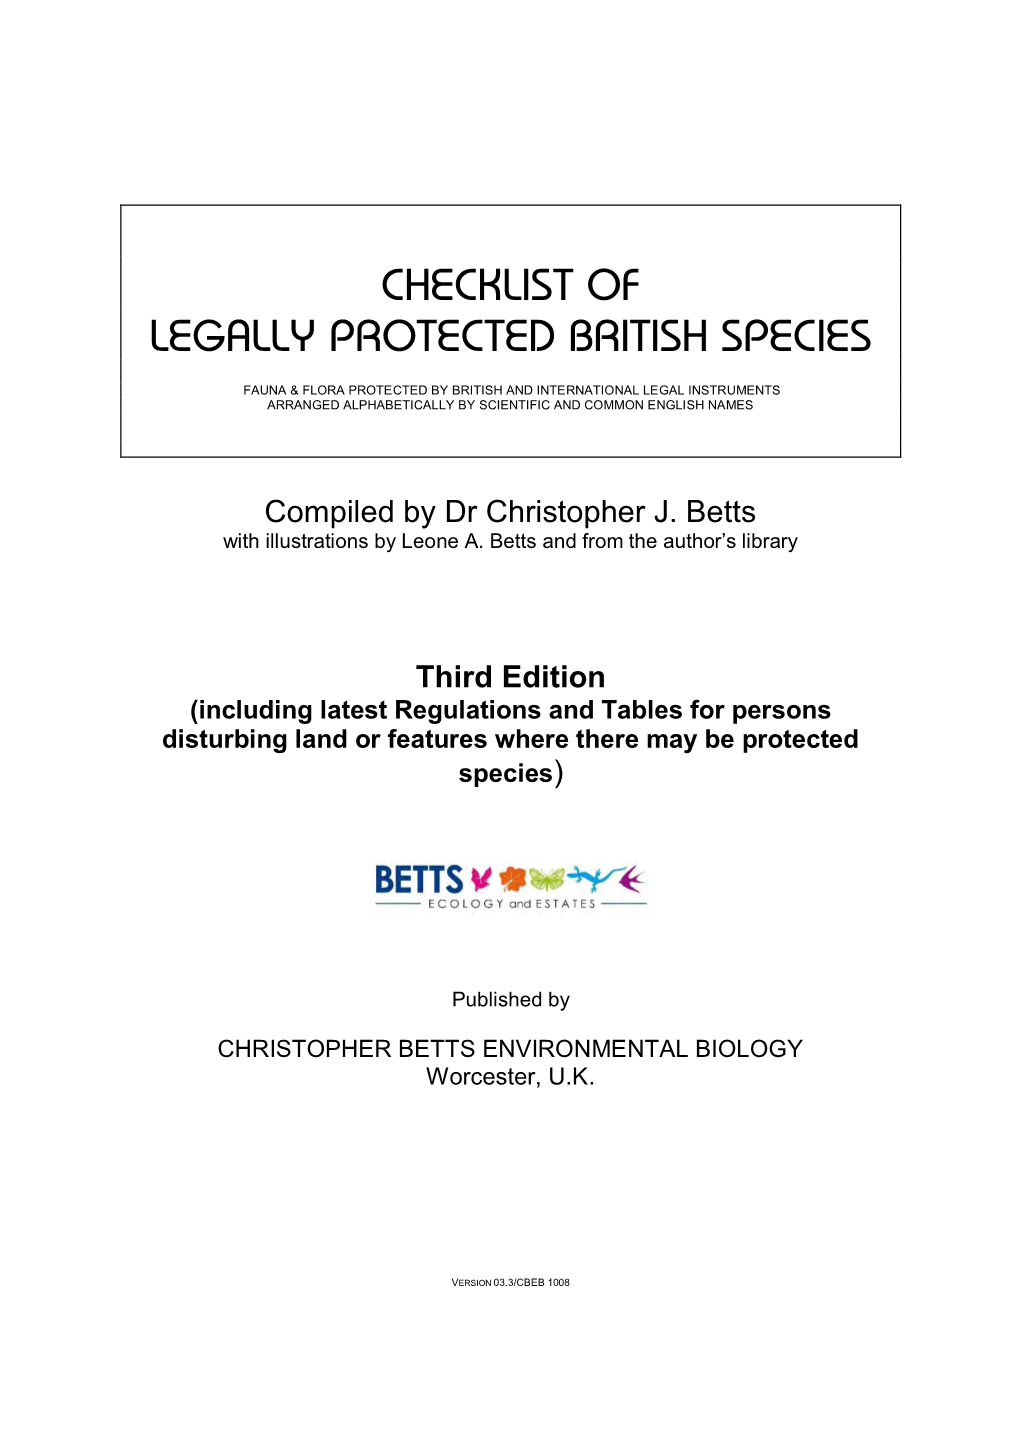 Checklist of Legally Protected British Species